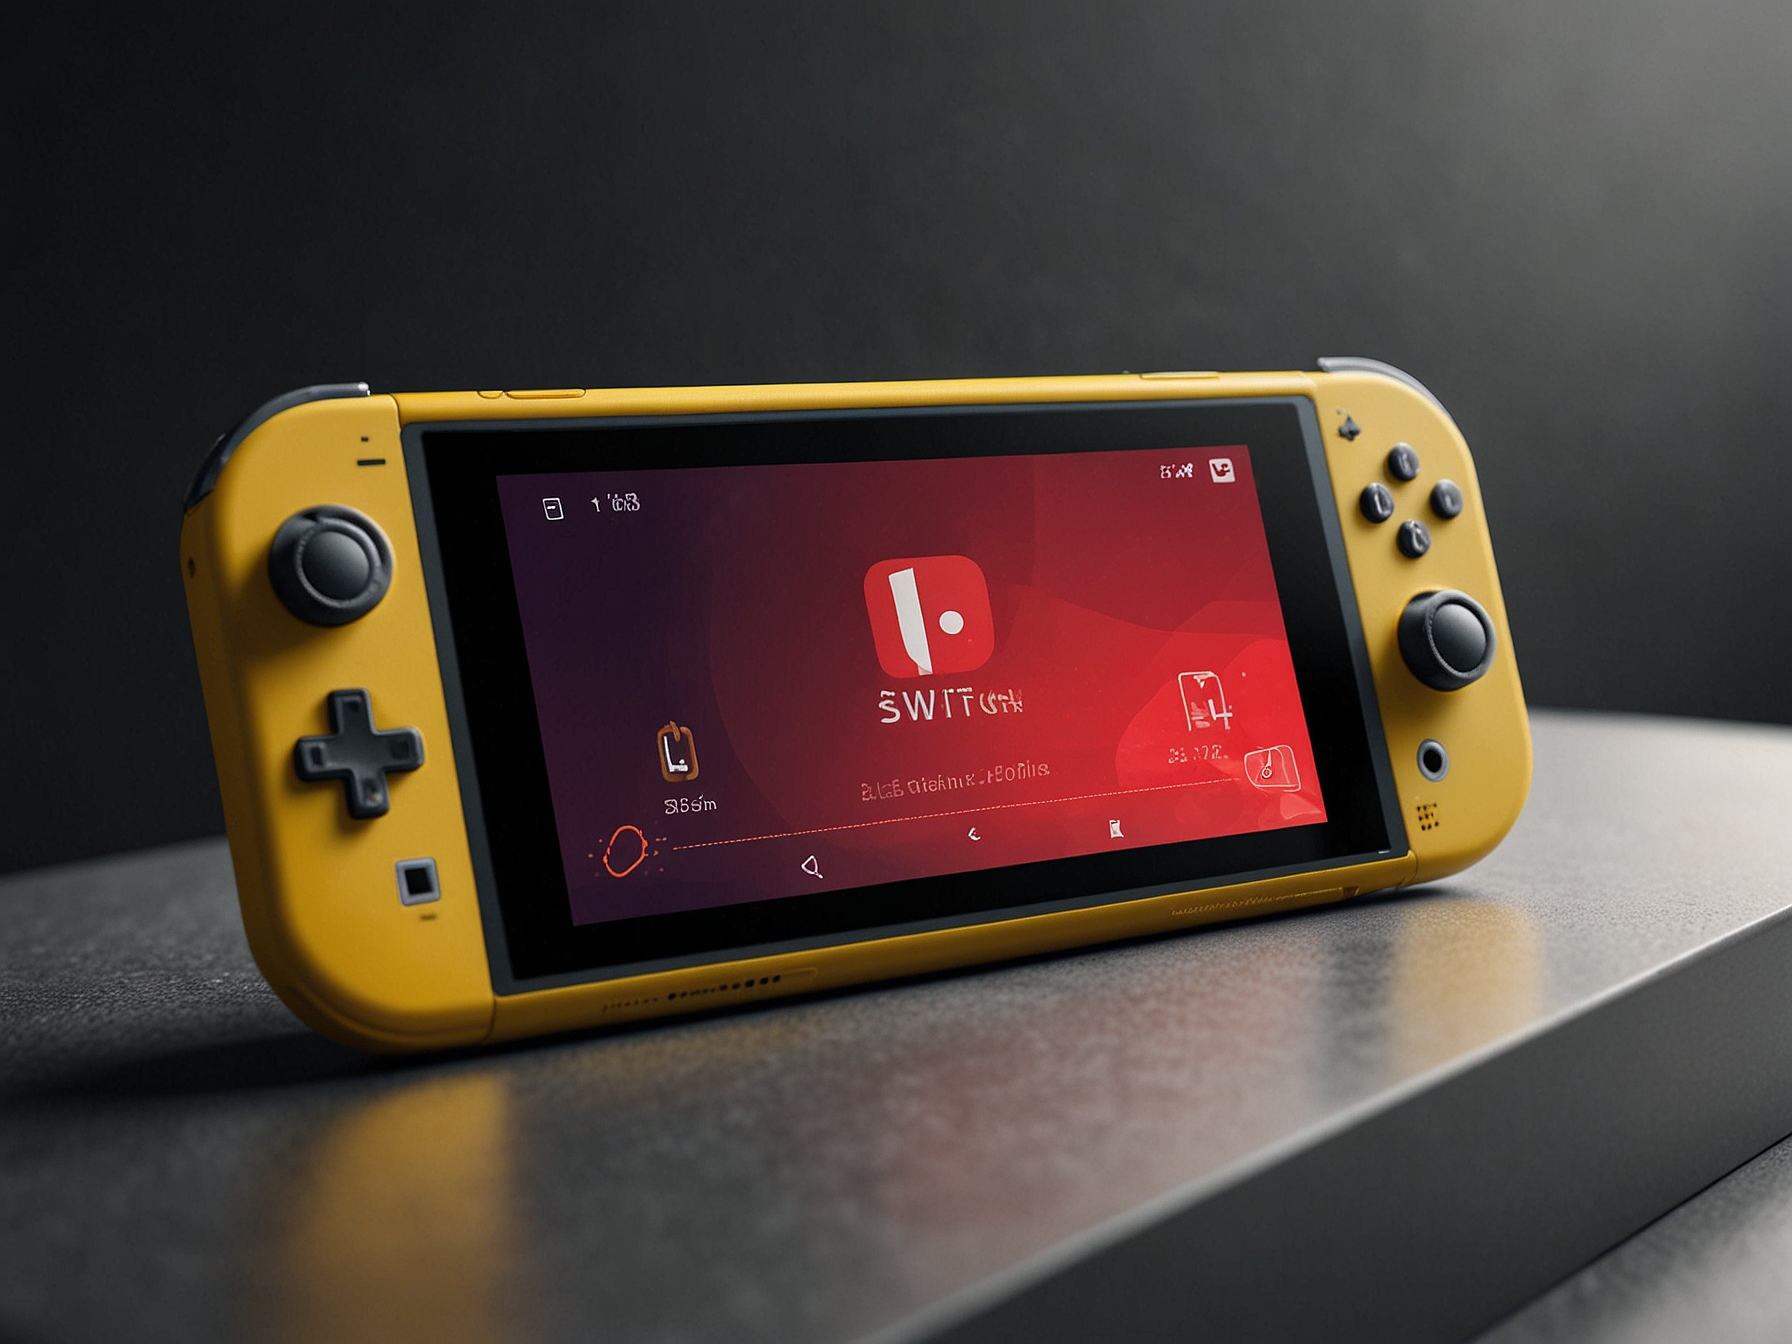 Image of the vibrant yellow Nintendo Switch Lite on display. It showcases its compact design, 5.5-inch LCD touchscreen, and non-detachable controllers, emphasizing portability.